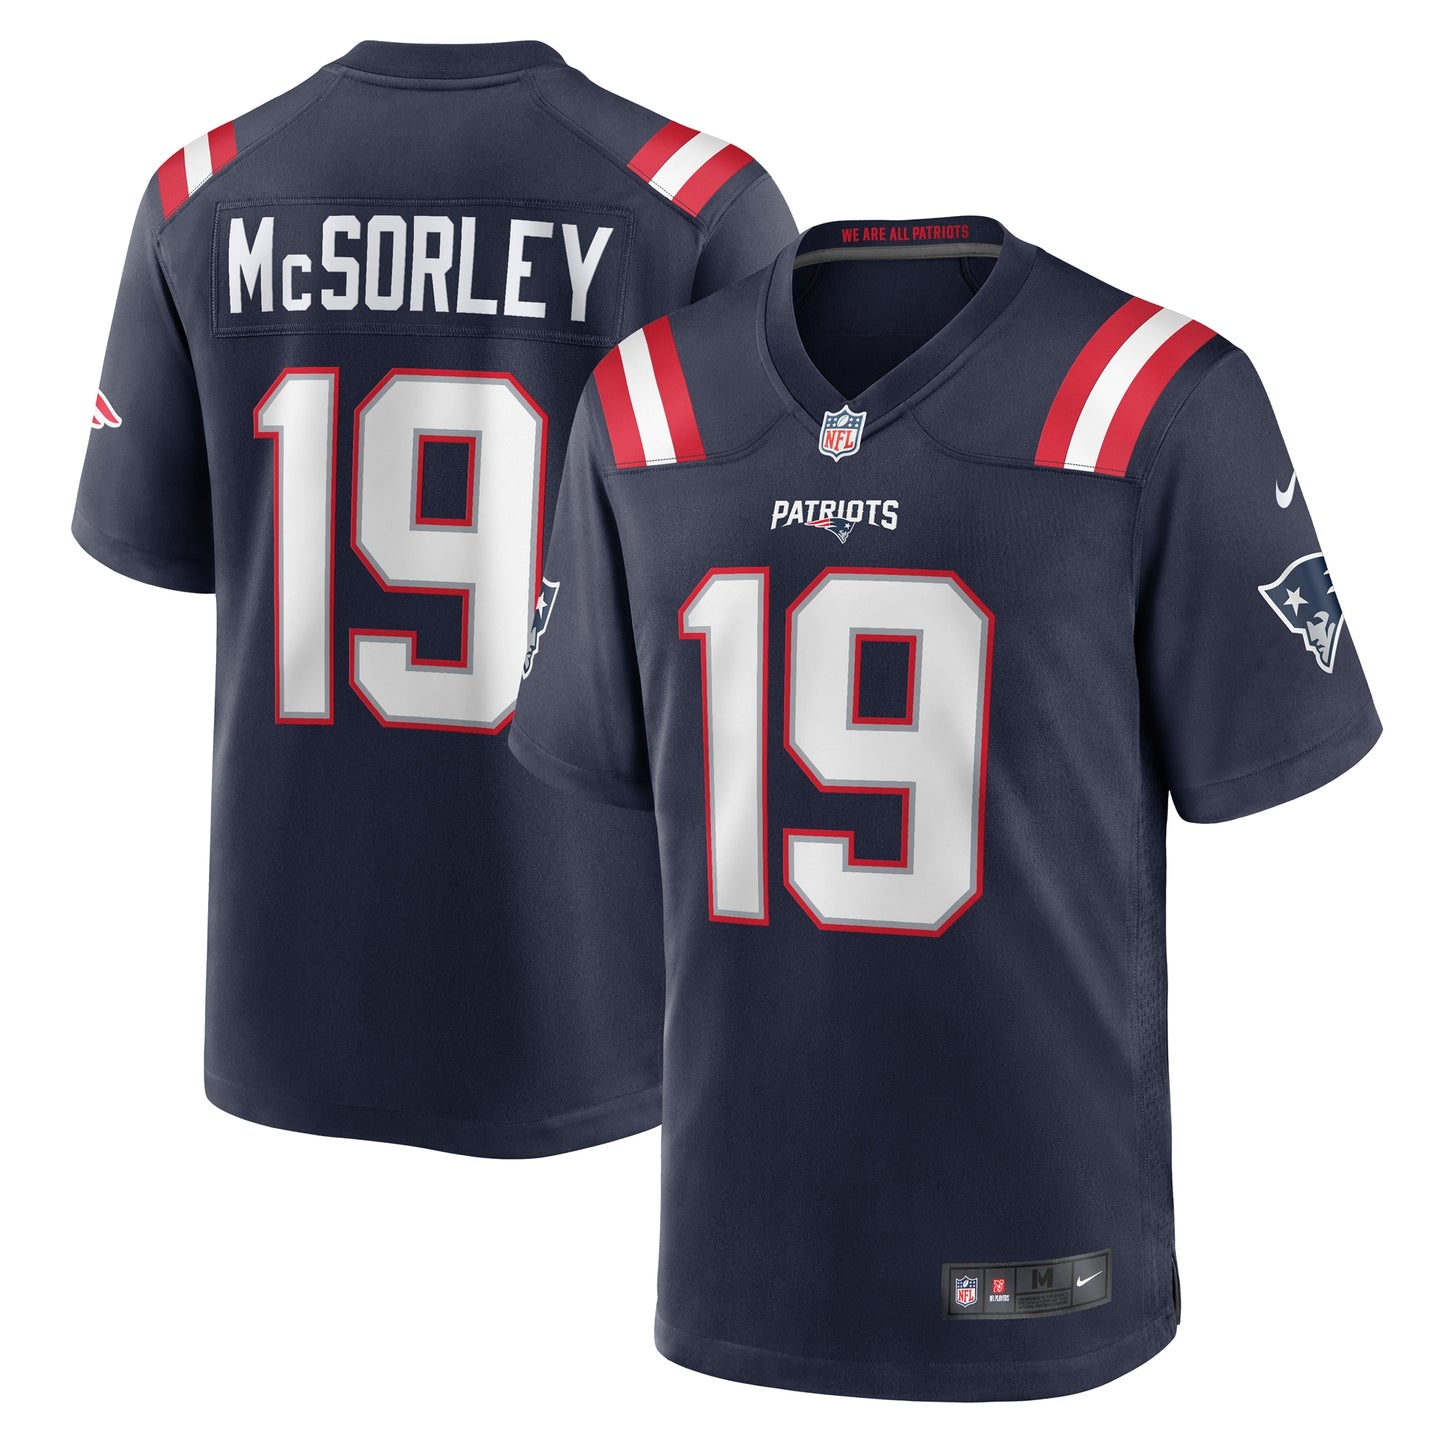 Trace McSorley New England Patriots Nike Game Player Jersey - Navy